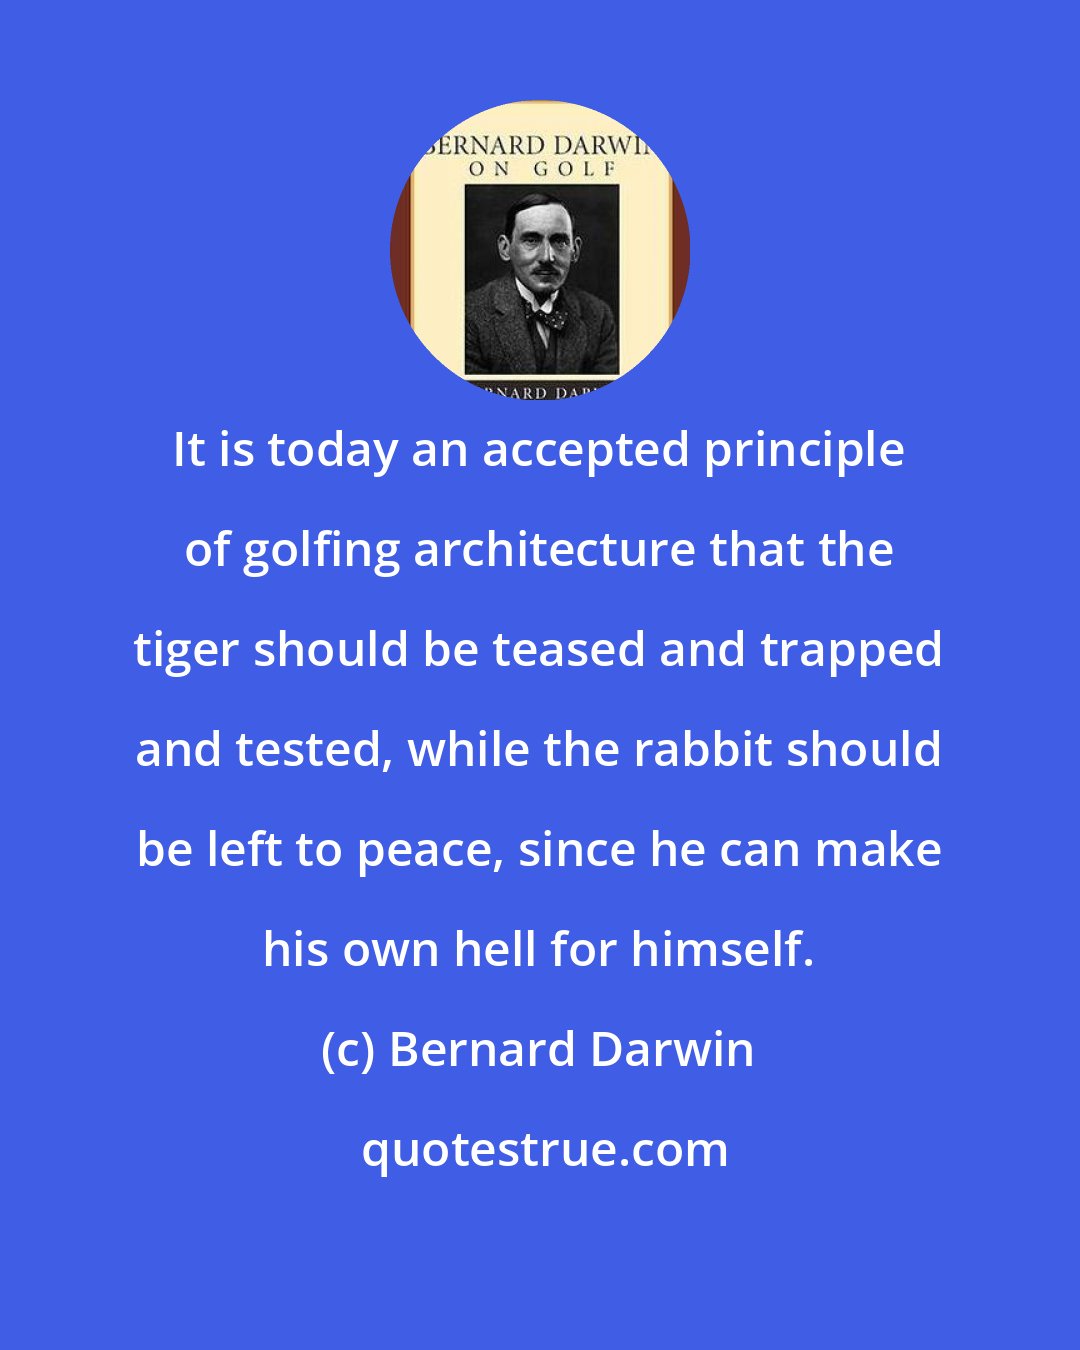 Bernard Darwin: It is today an accepted principle of golfing architecture that the tiger should be teased and trapped and tested, while the rabbit should be left to peace, since he can make his own hell for himself.